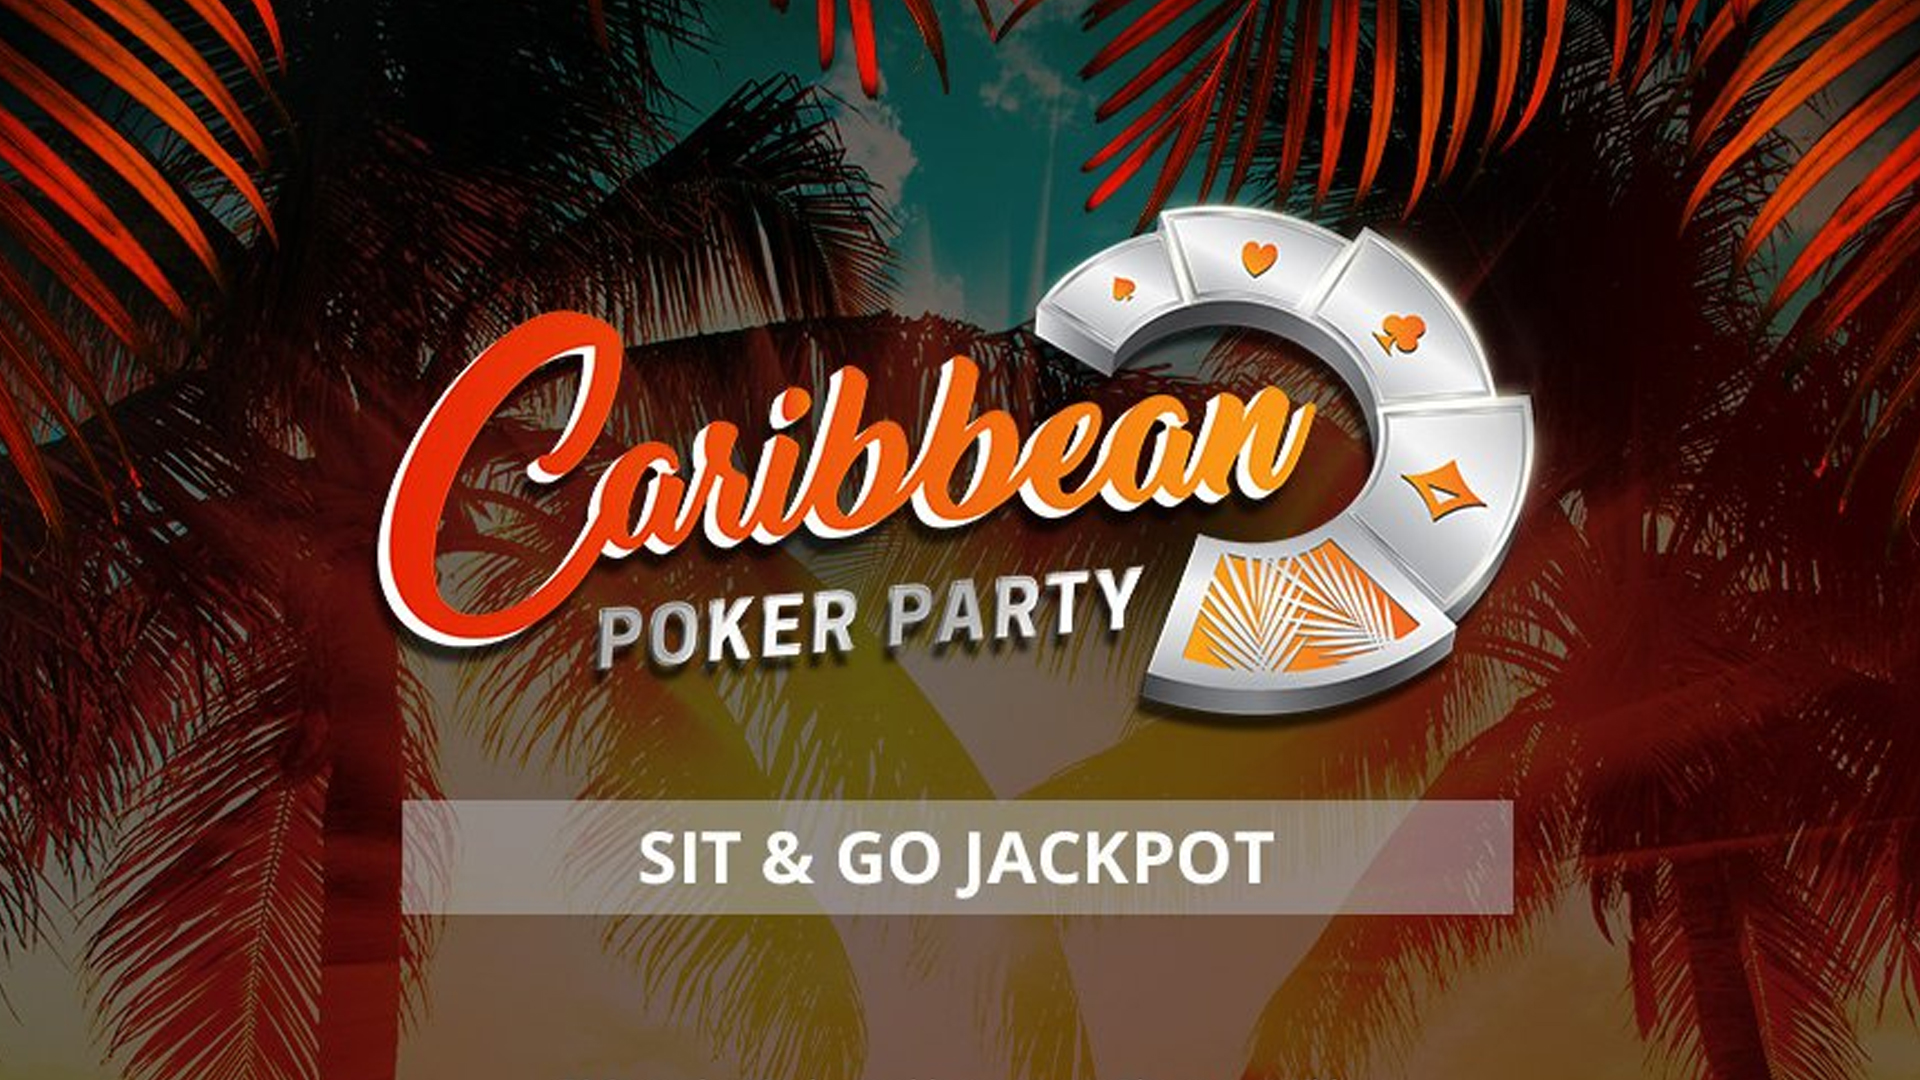 Win your way to the Caribbean Poker Party!